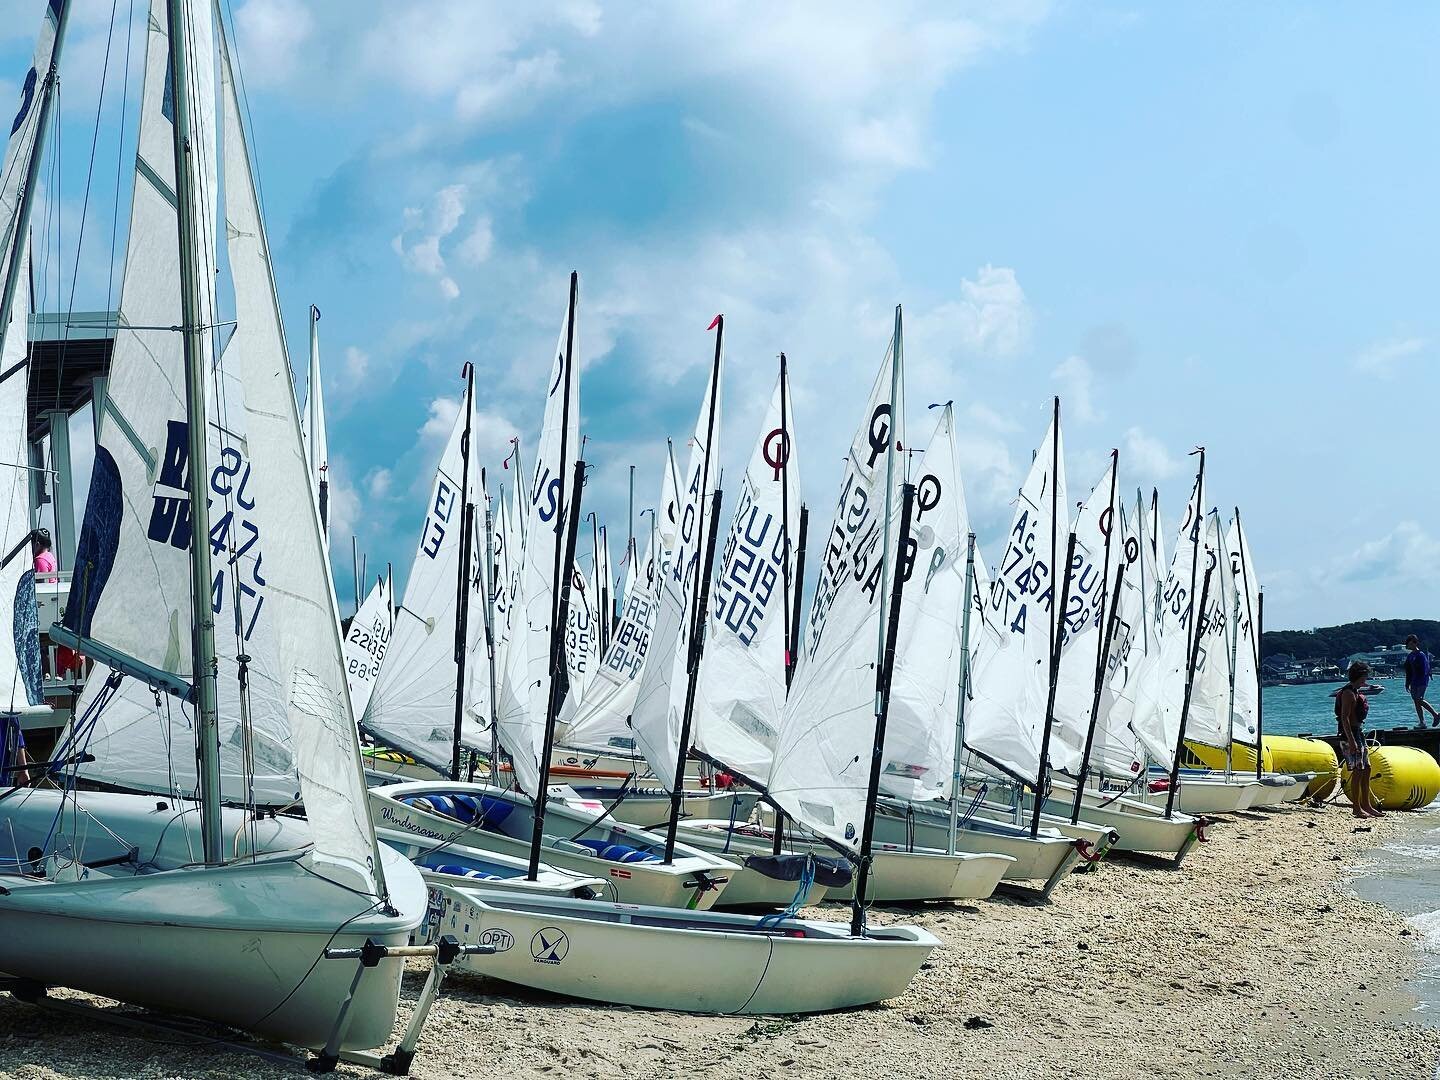 Happy PGJSA Monday.  Are you getting out on the water today or taking it easy or both?? #sailing #youthsailing